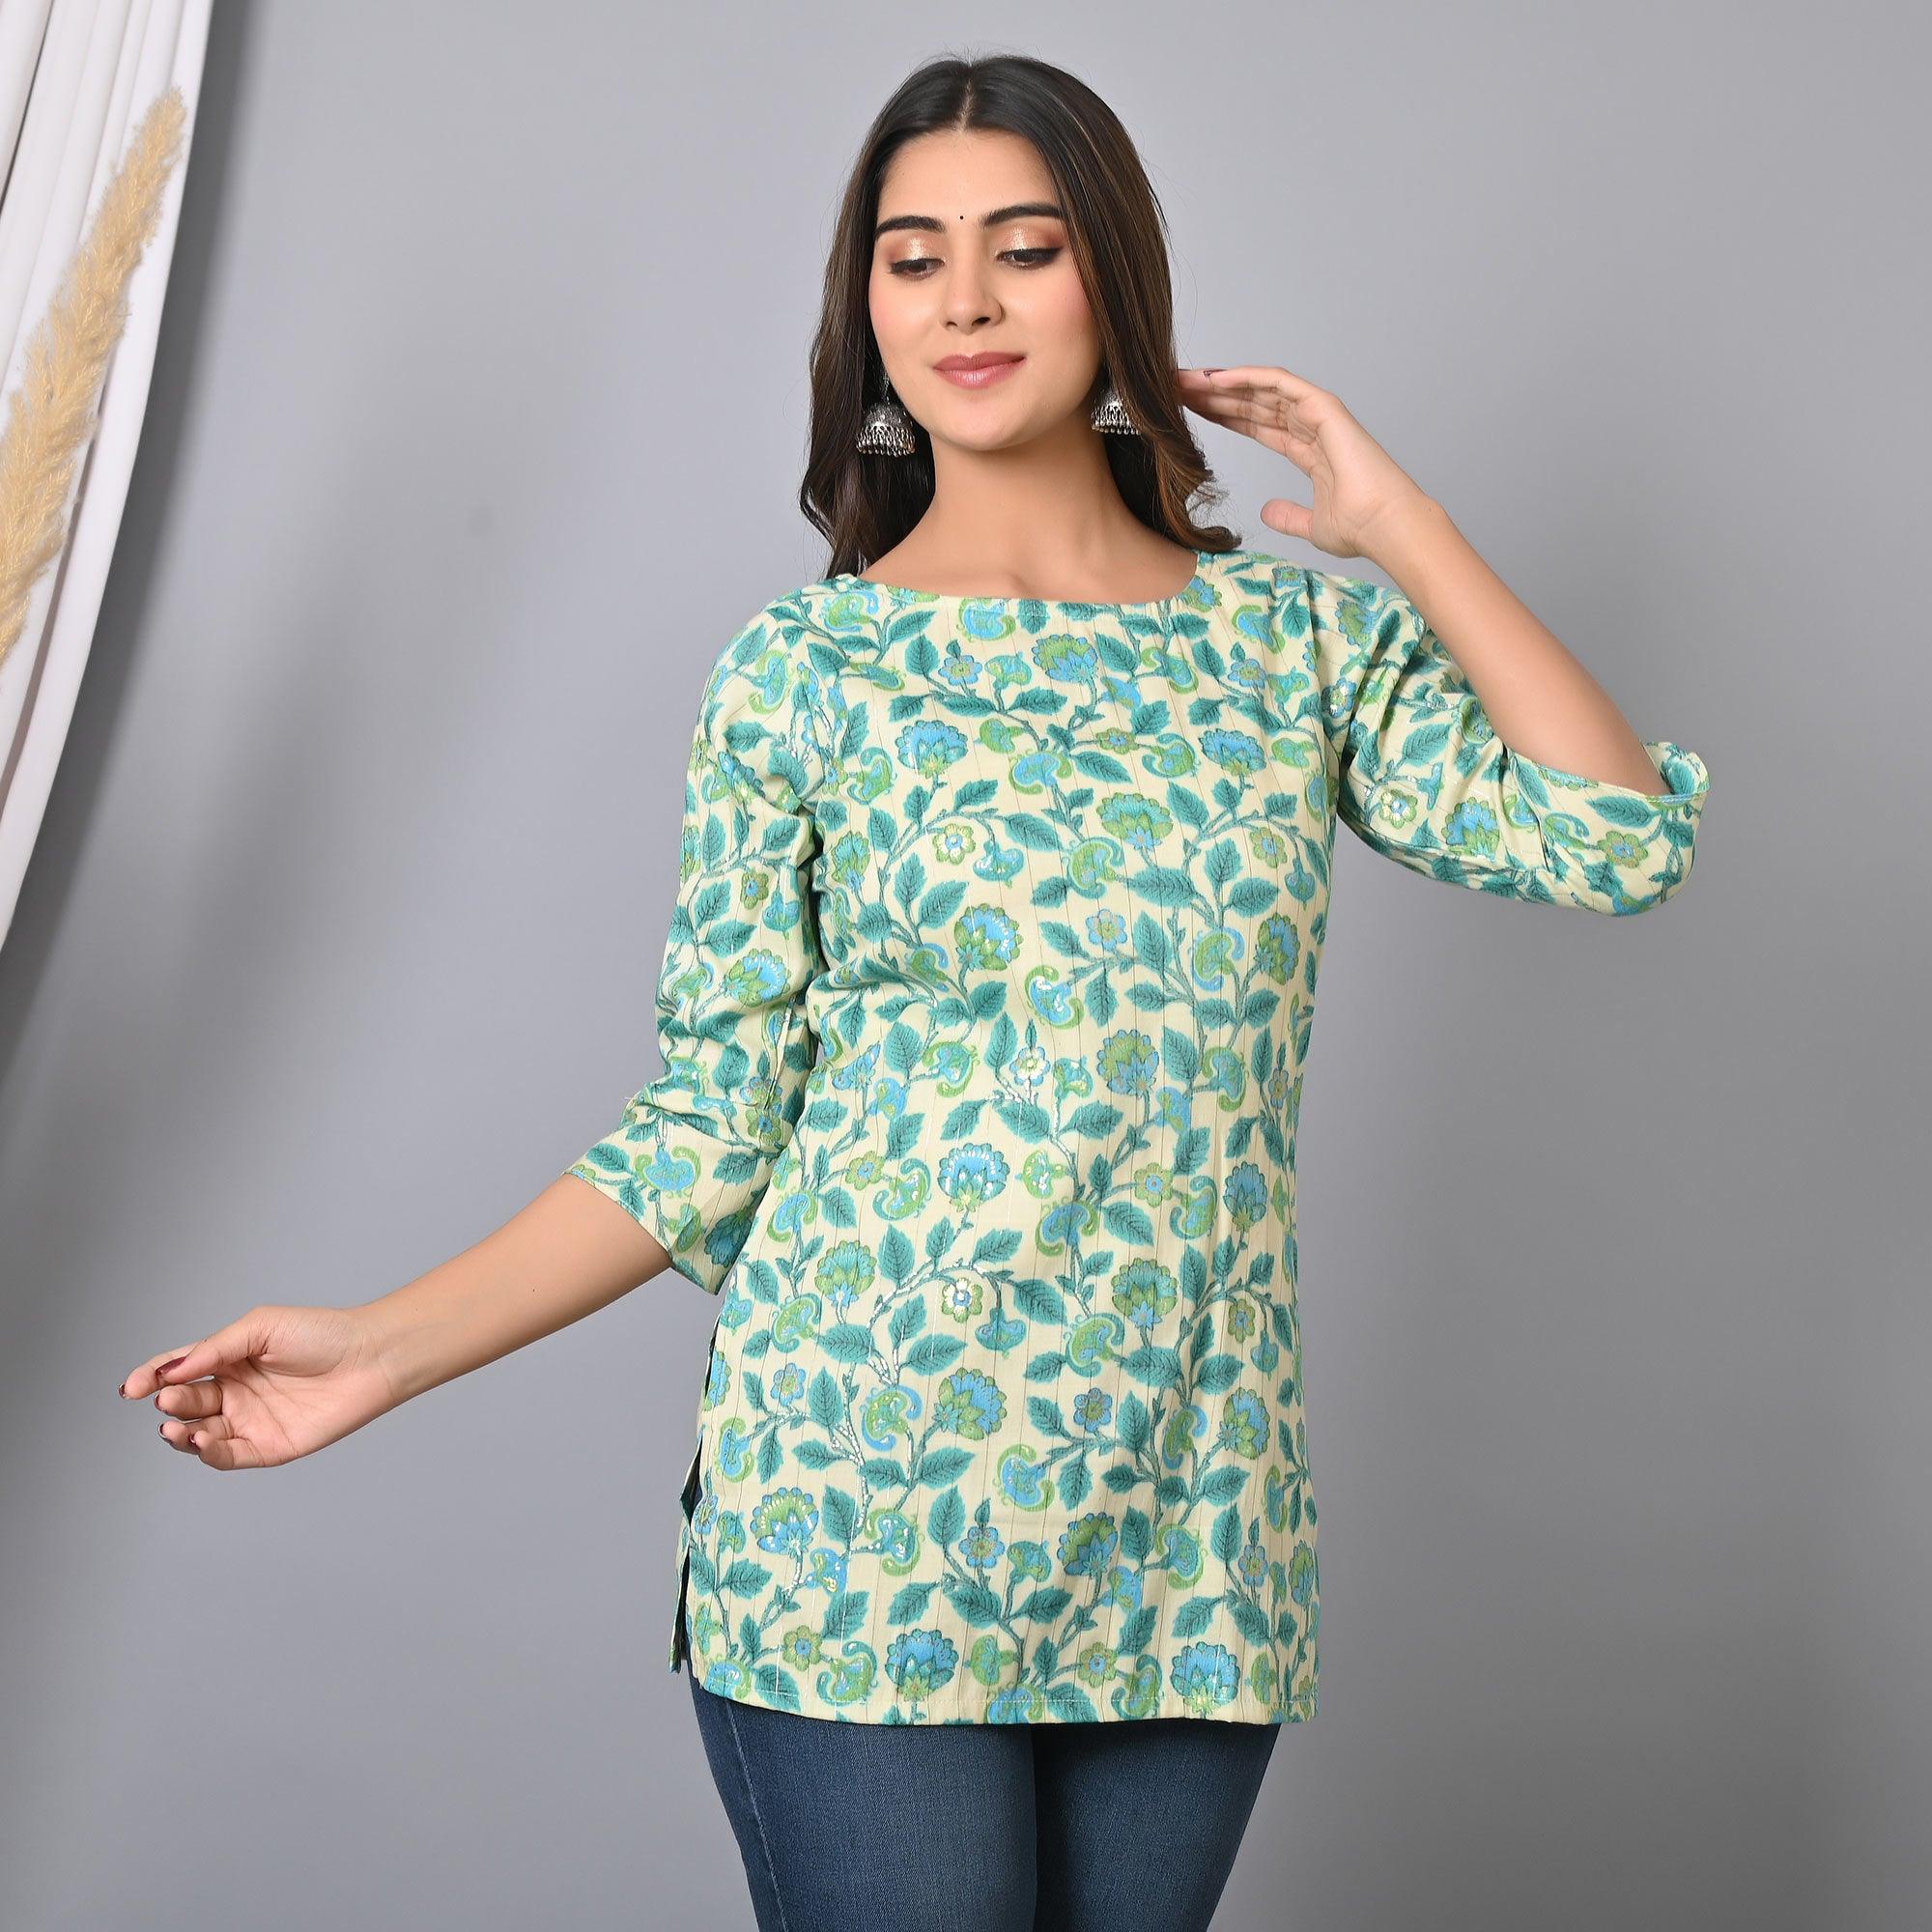 Blue Floral Printed Rayon Top - Peachmode